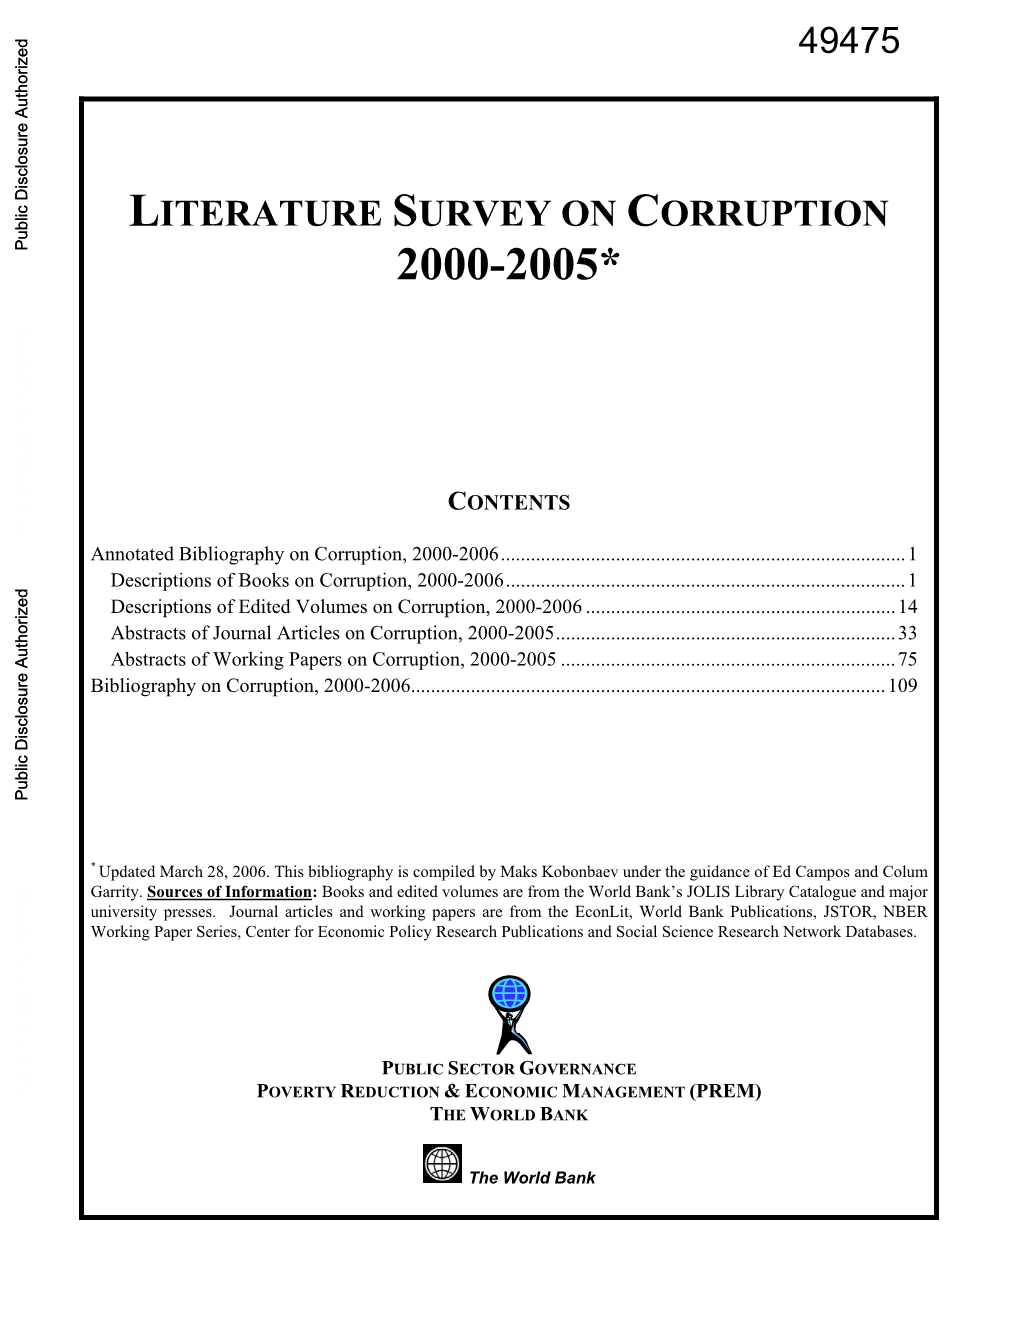 Annotated Bibliography on Corruption, 2000-2006